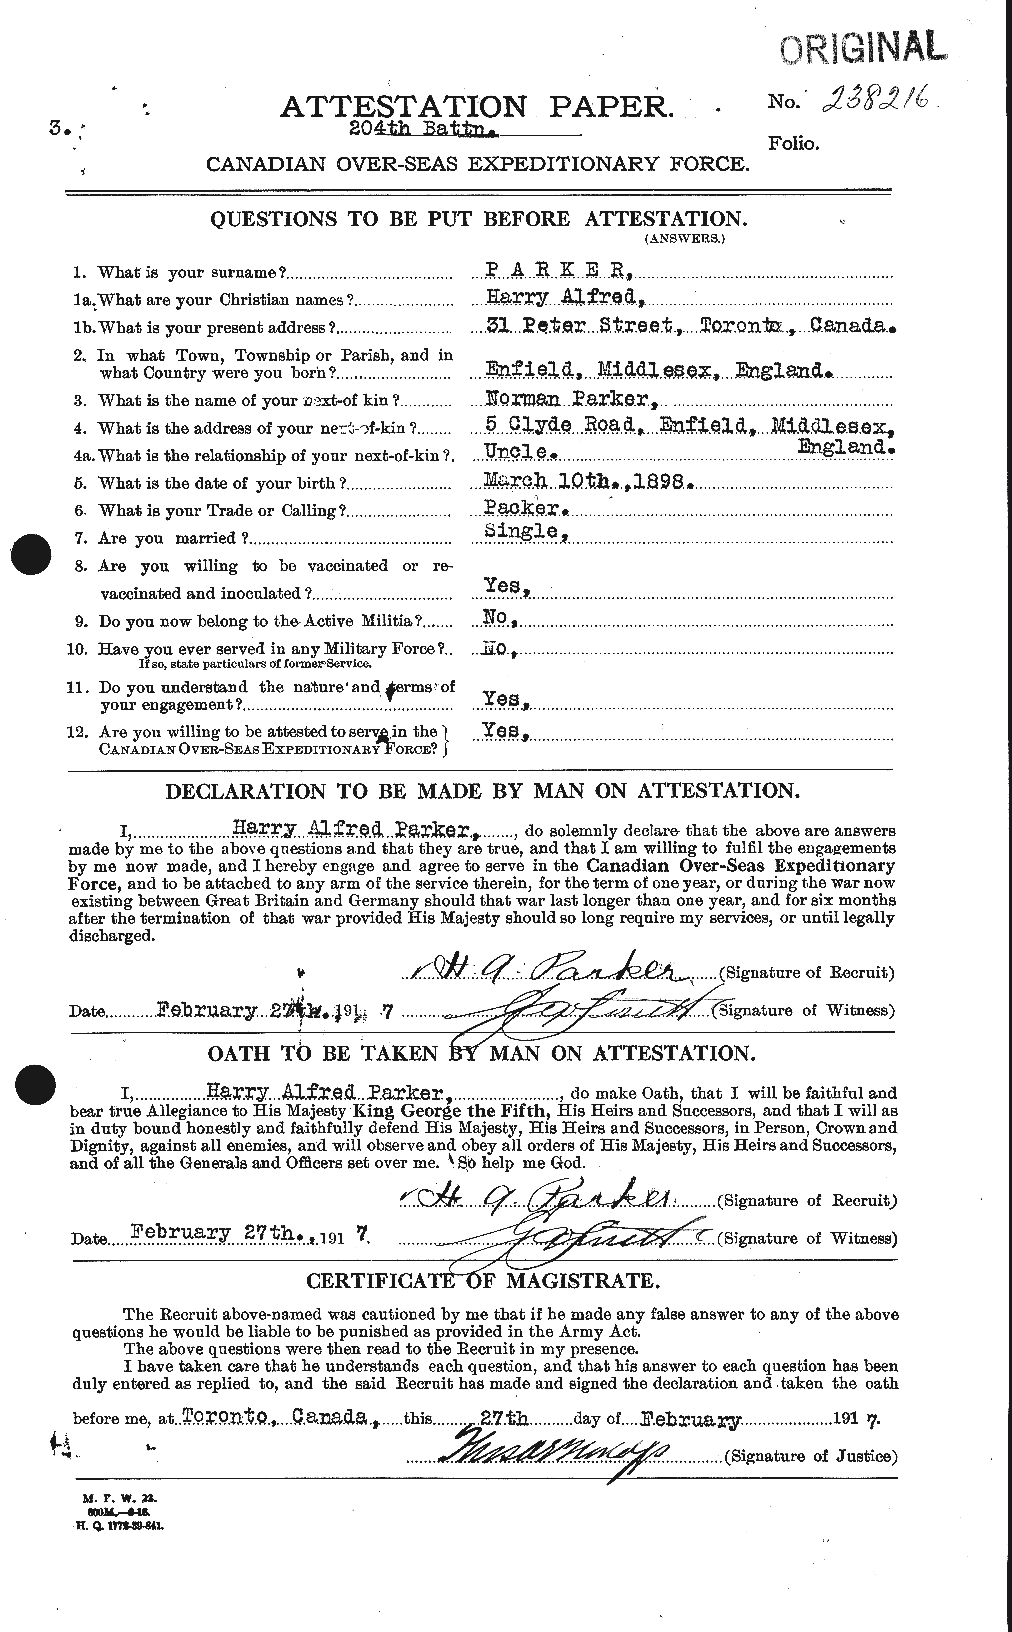 Personnel Records of the First World War - CEF 565328a